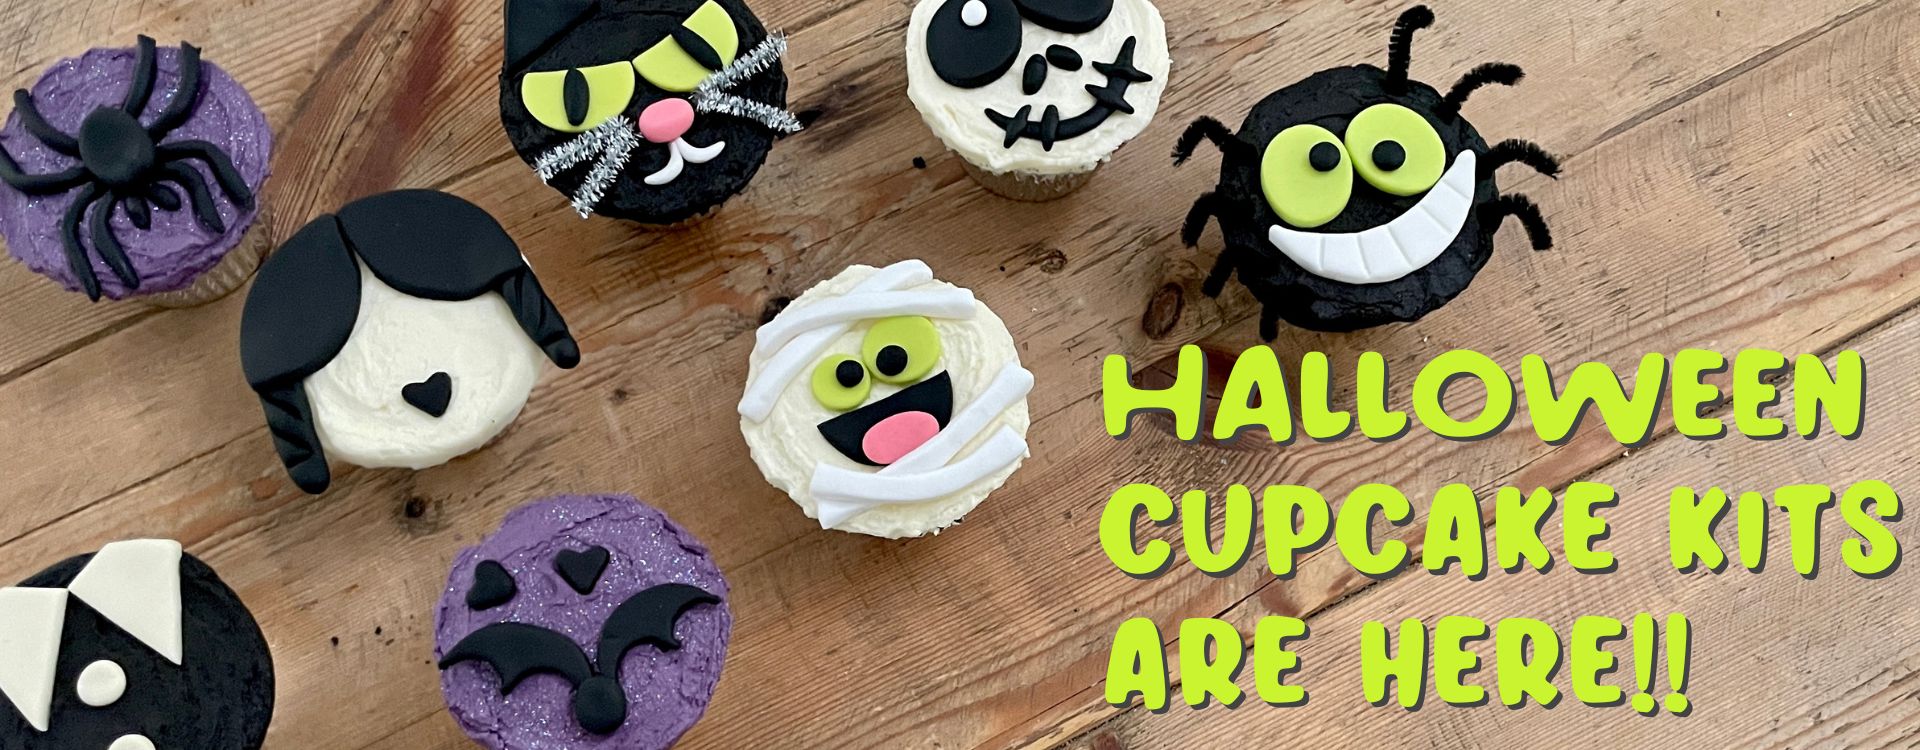 Halloween-cakes-and-cupcakes